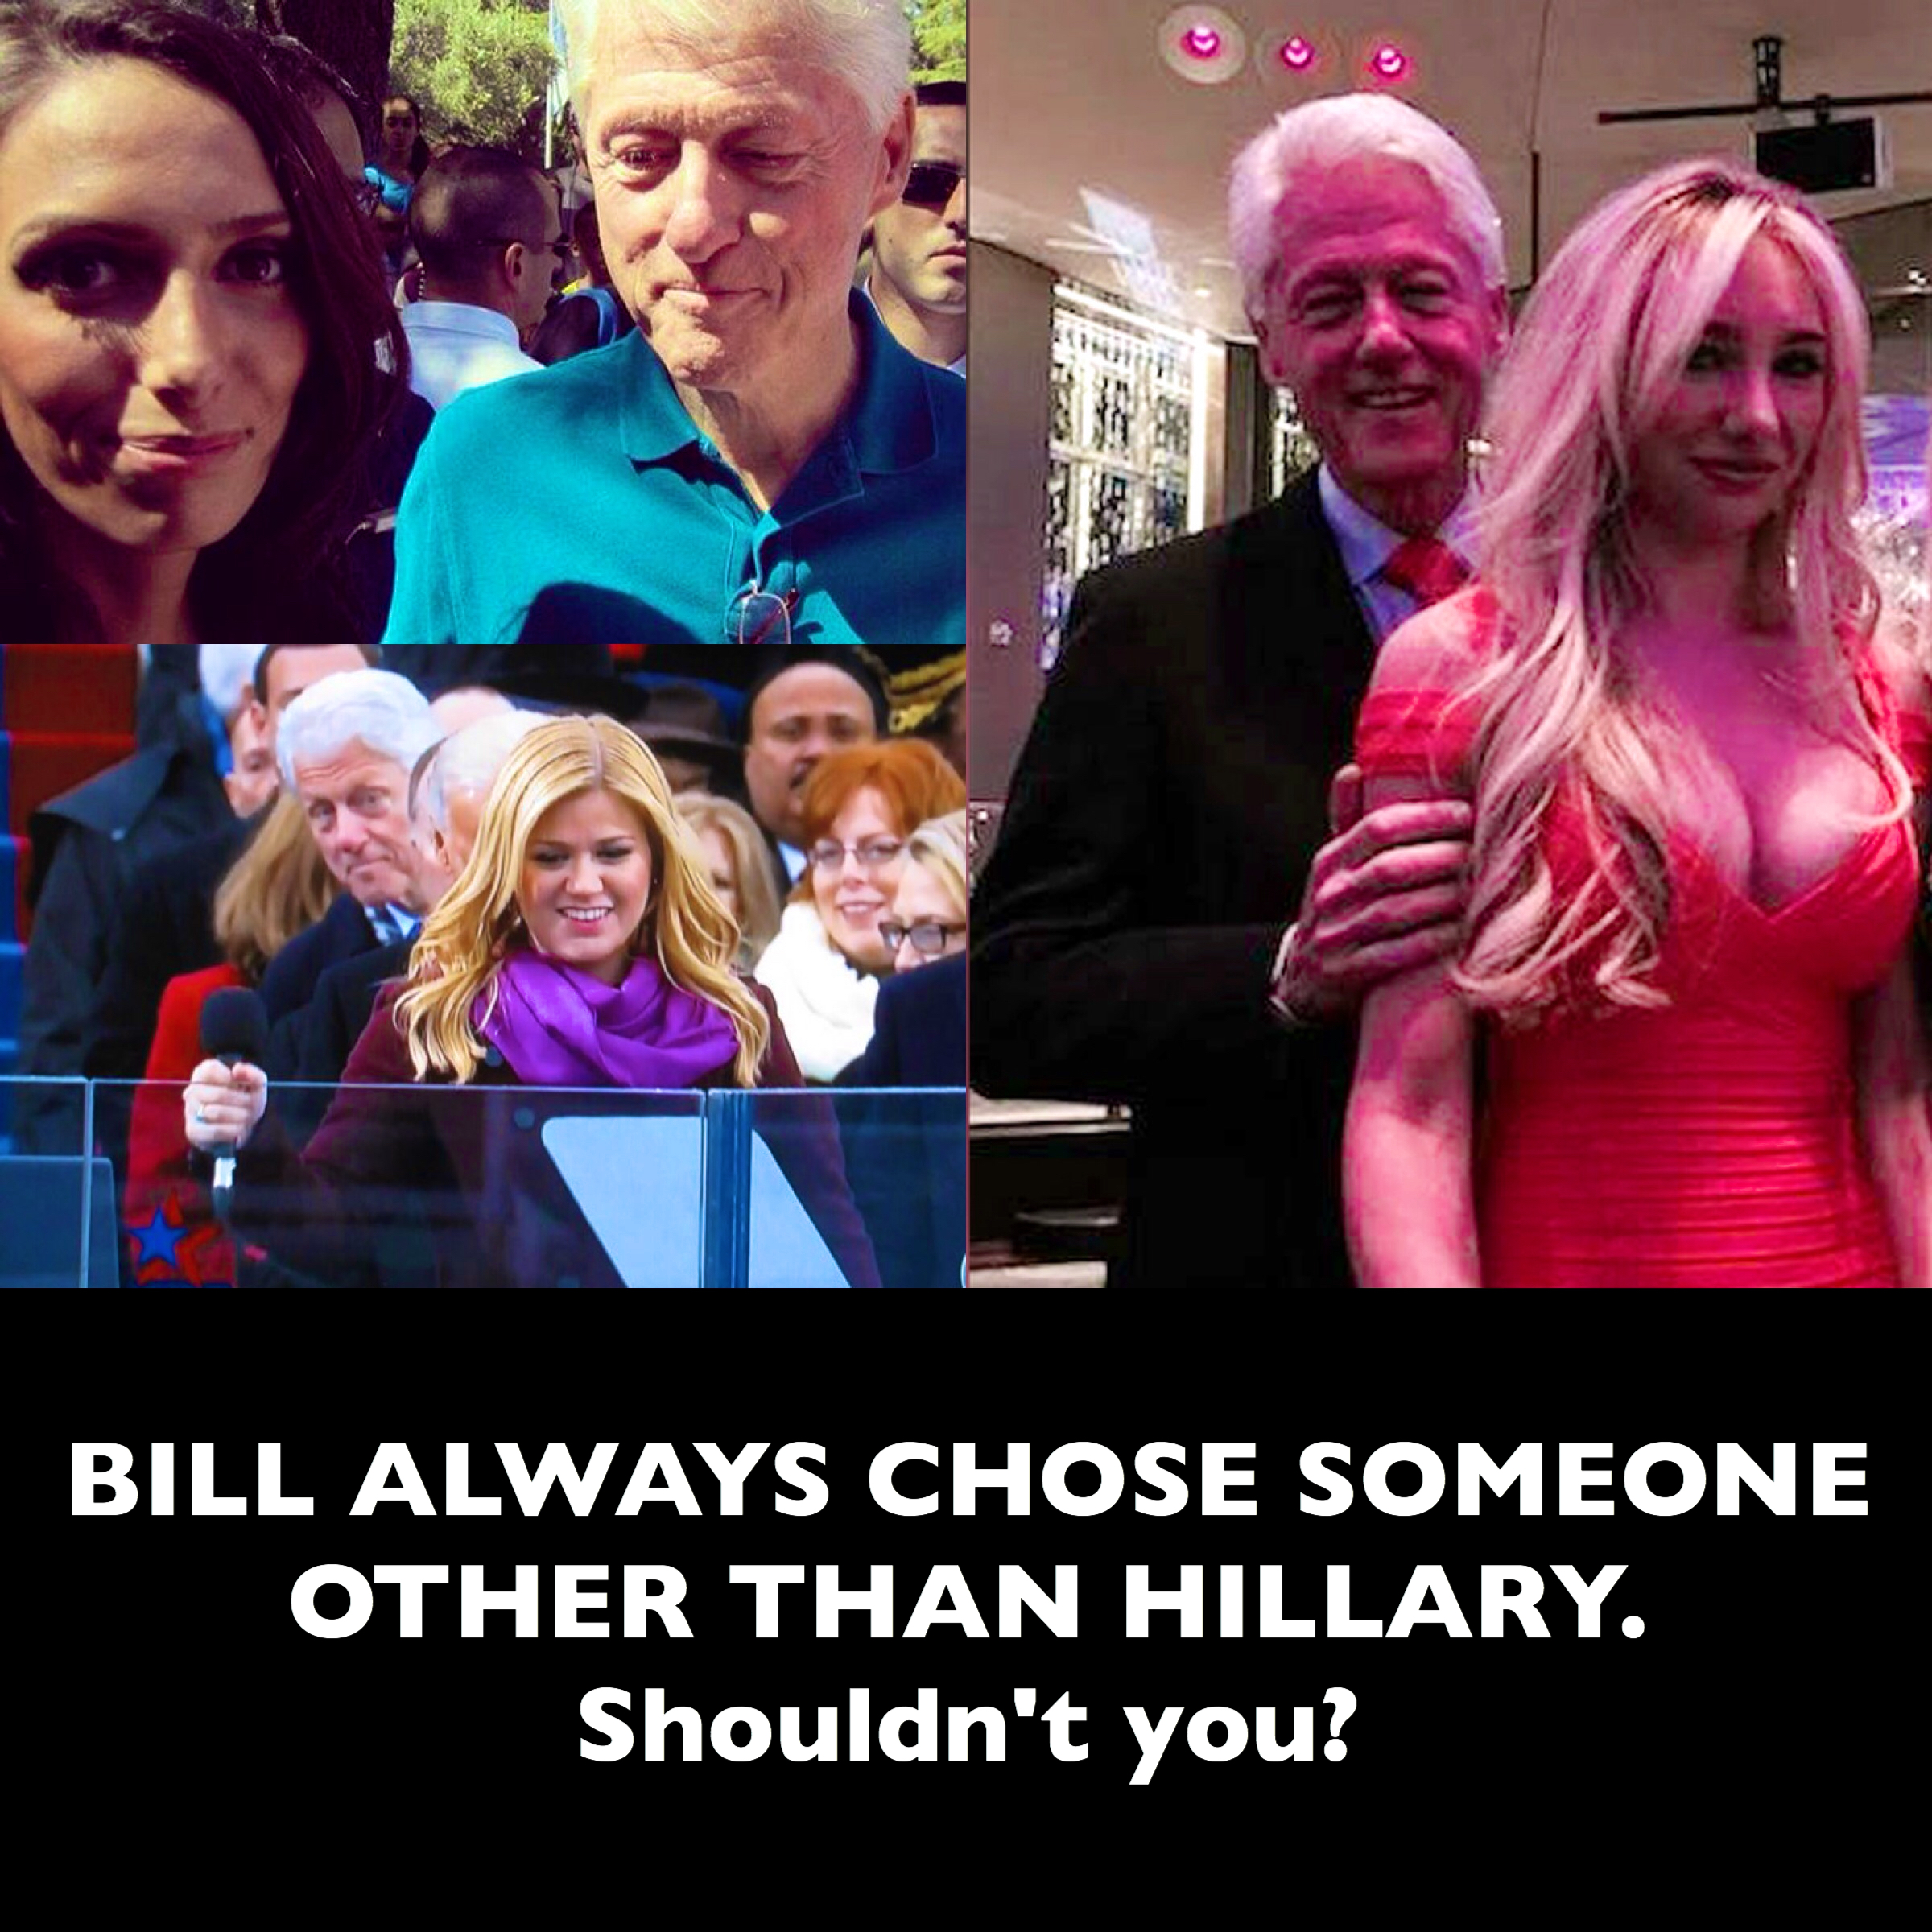 bill clinton looking at women - Bill Always Chose Someone Other Than Hillary. Shouldn't you?